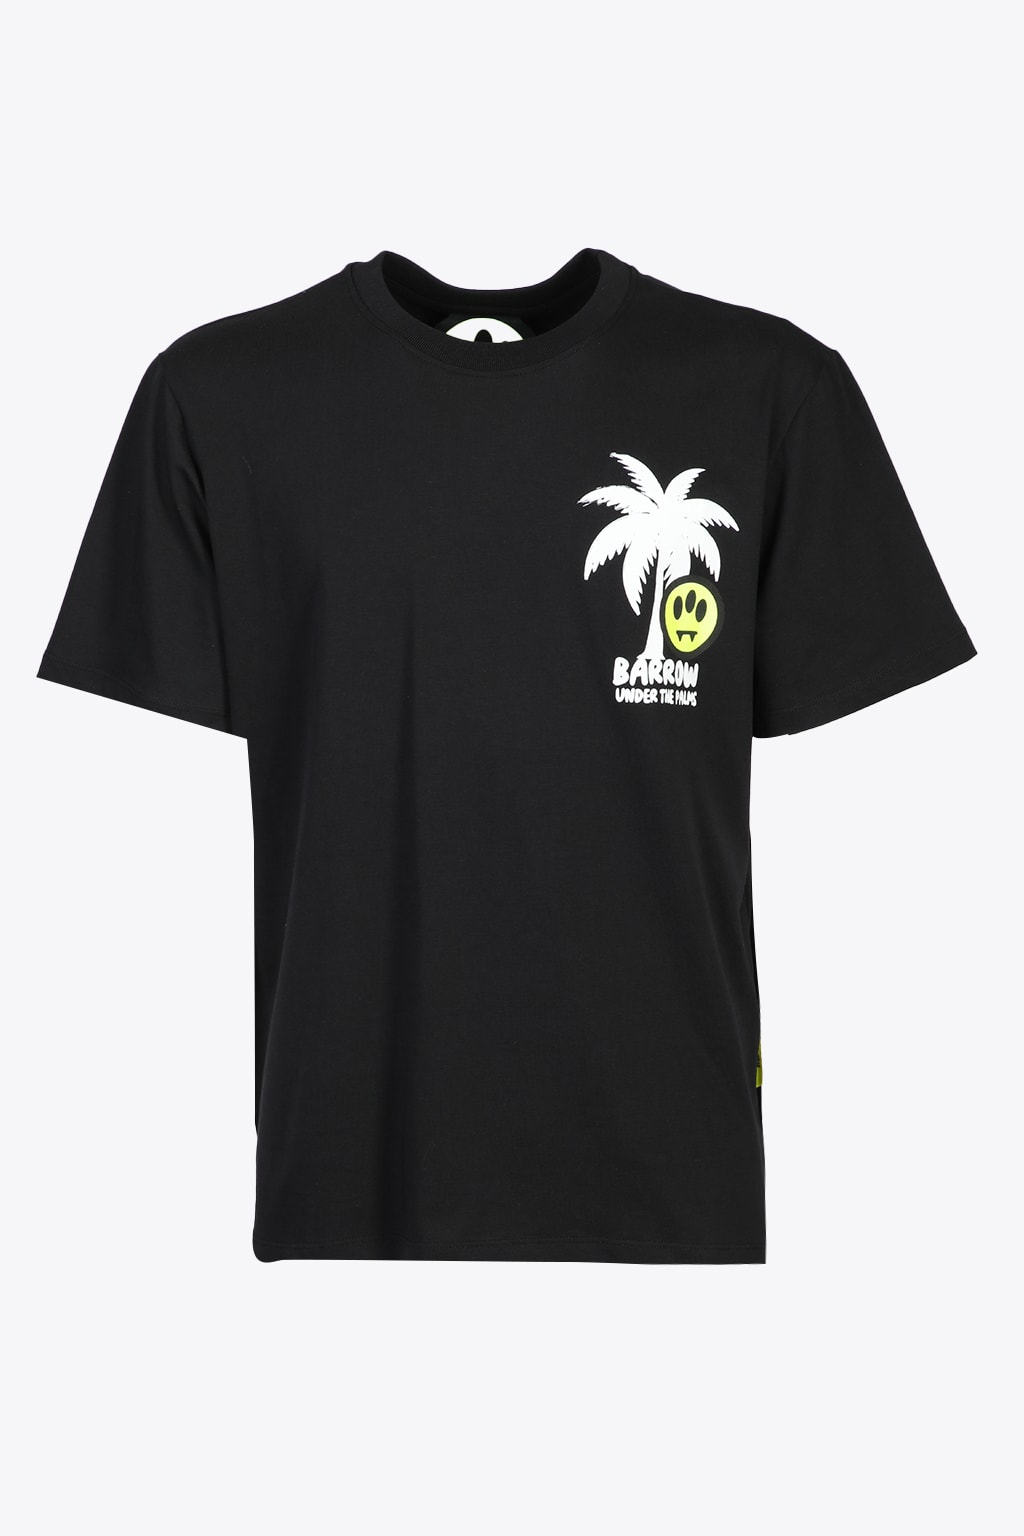 BARROW JERSEY T-SHIRT UNISEX BLACK COTTON T-SHIRT WITH LOGO AND PALM PRINT